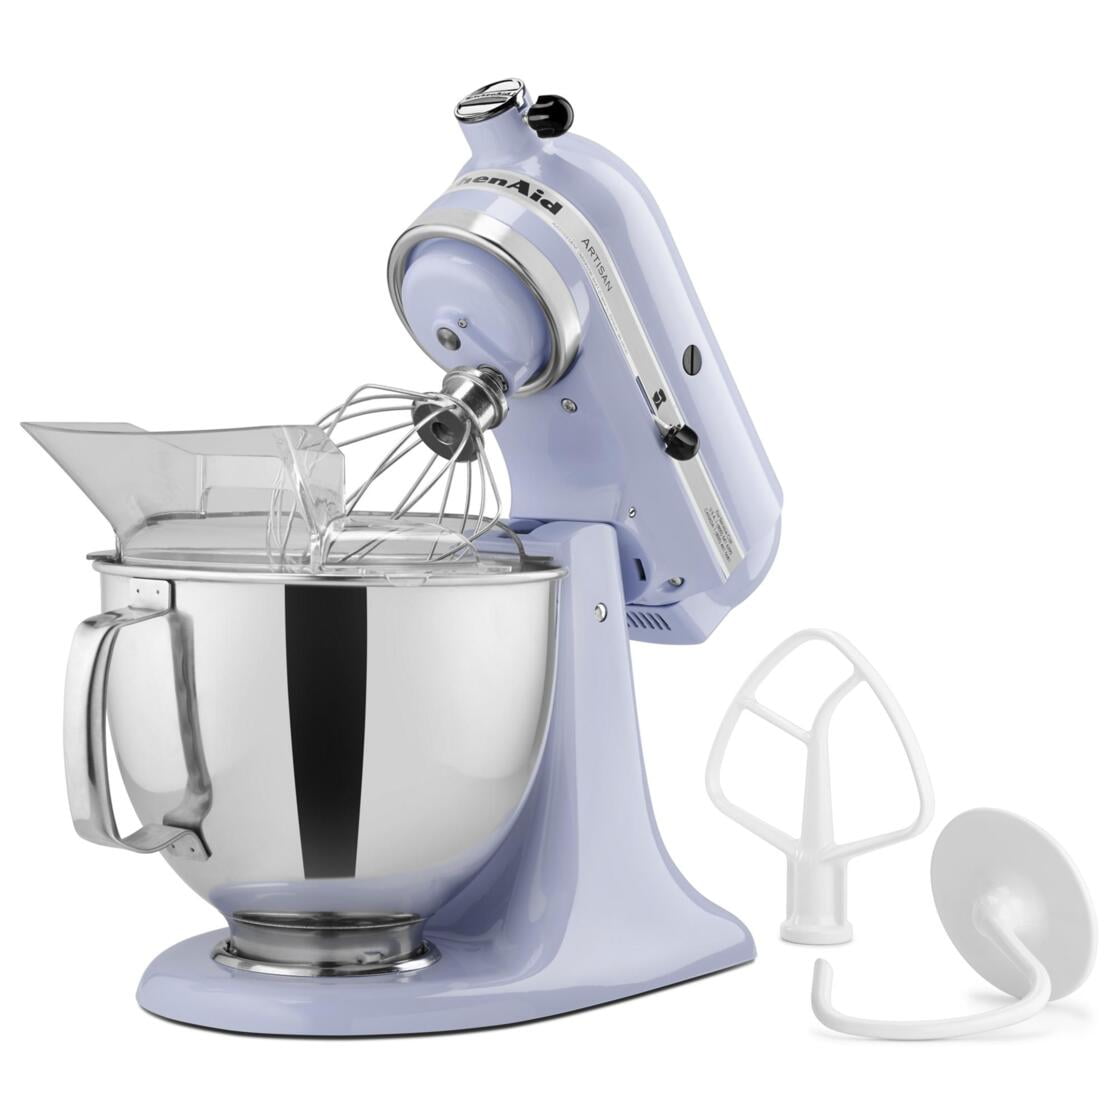 White KitchenAid Classic Tilt-Head Stand Mixer Works Great +Accessories  VG+Shape